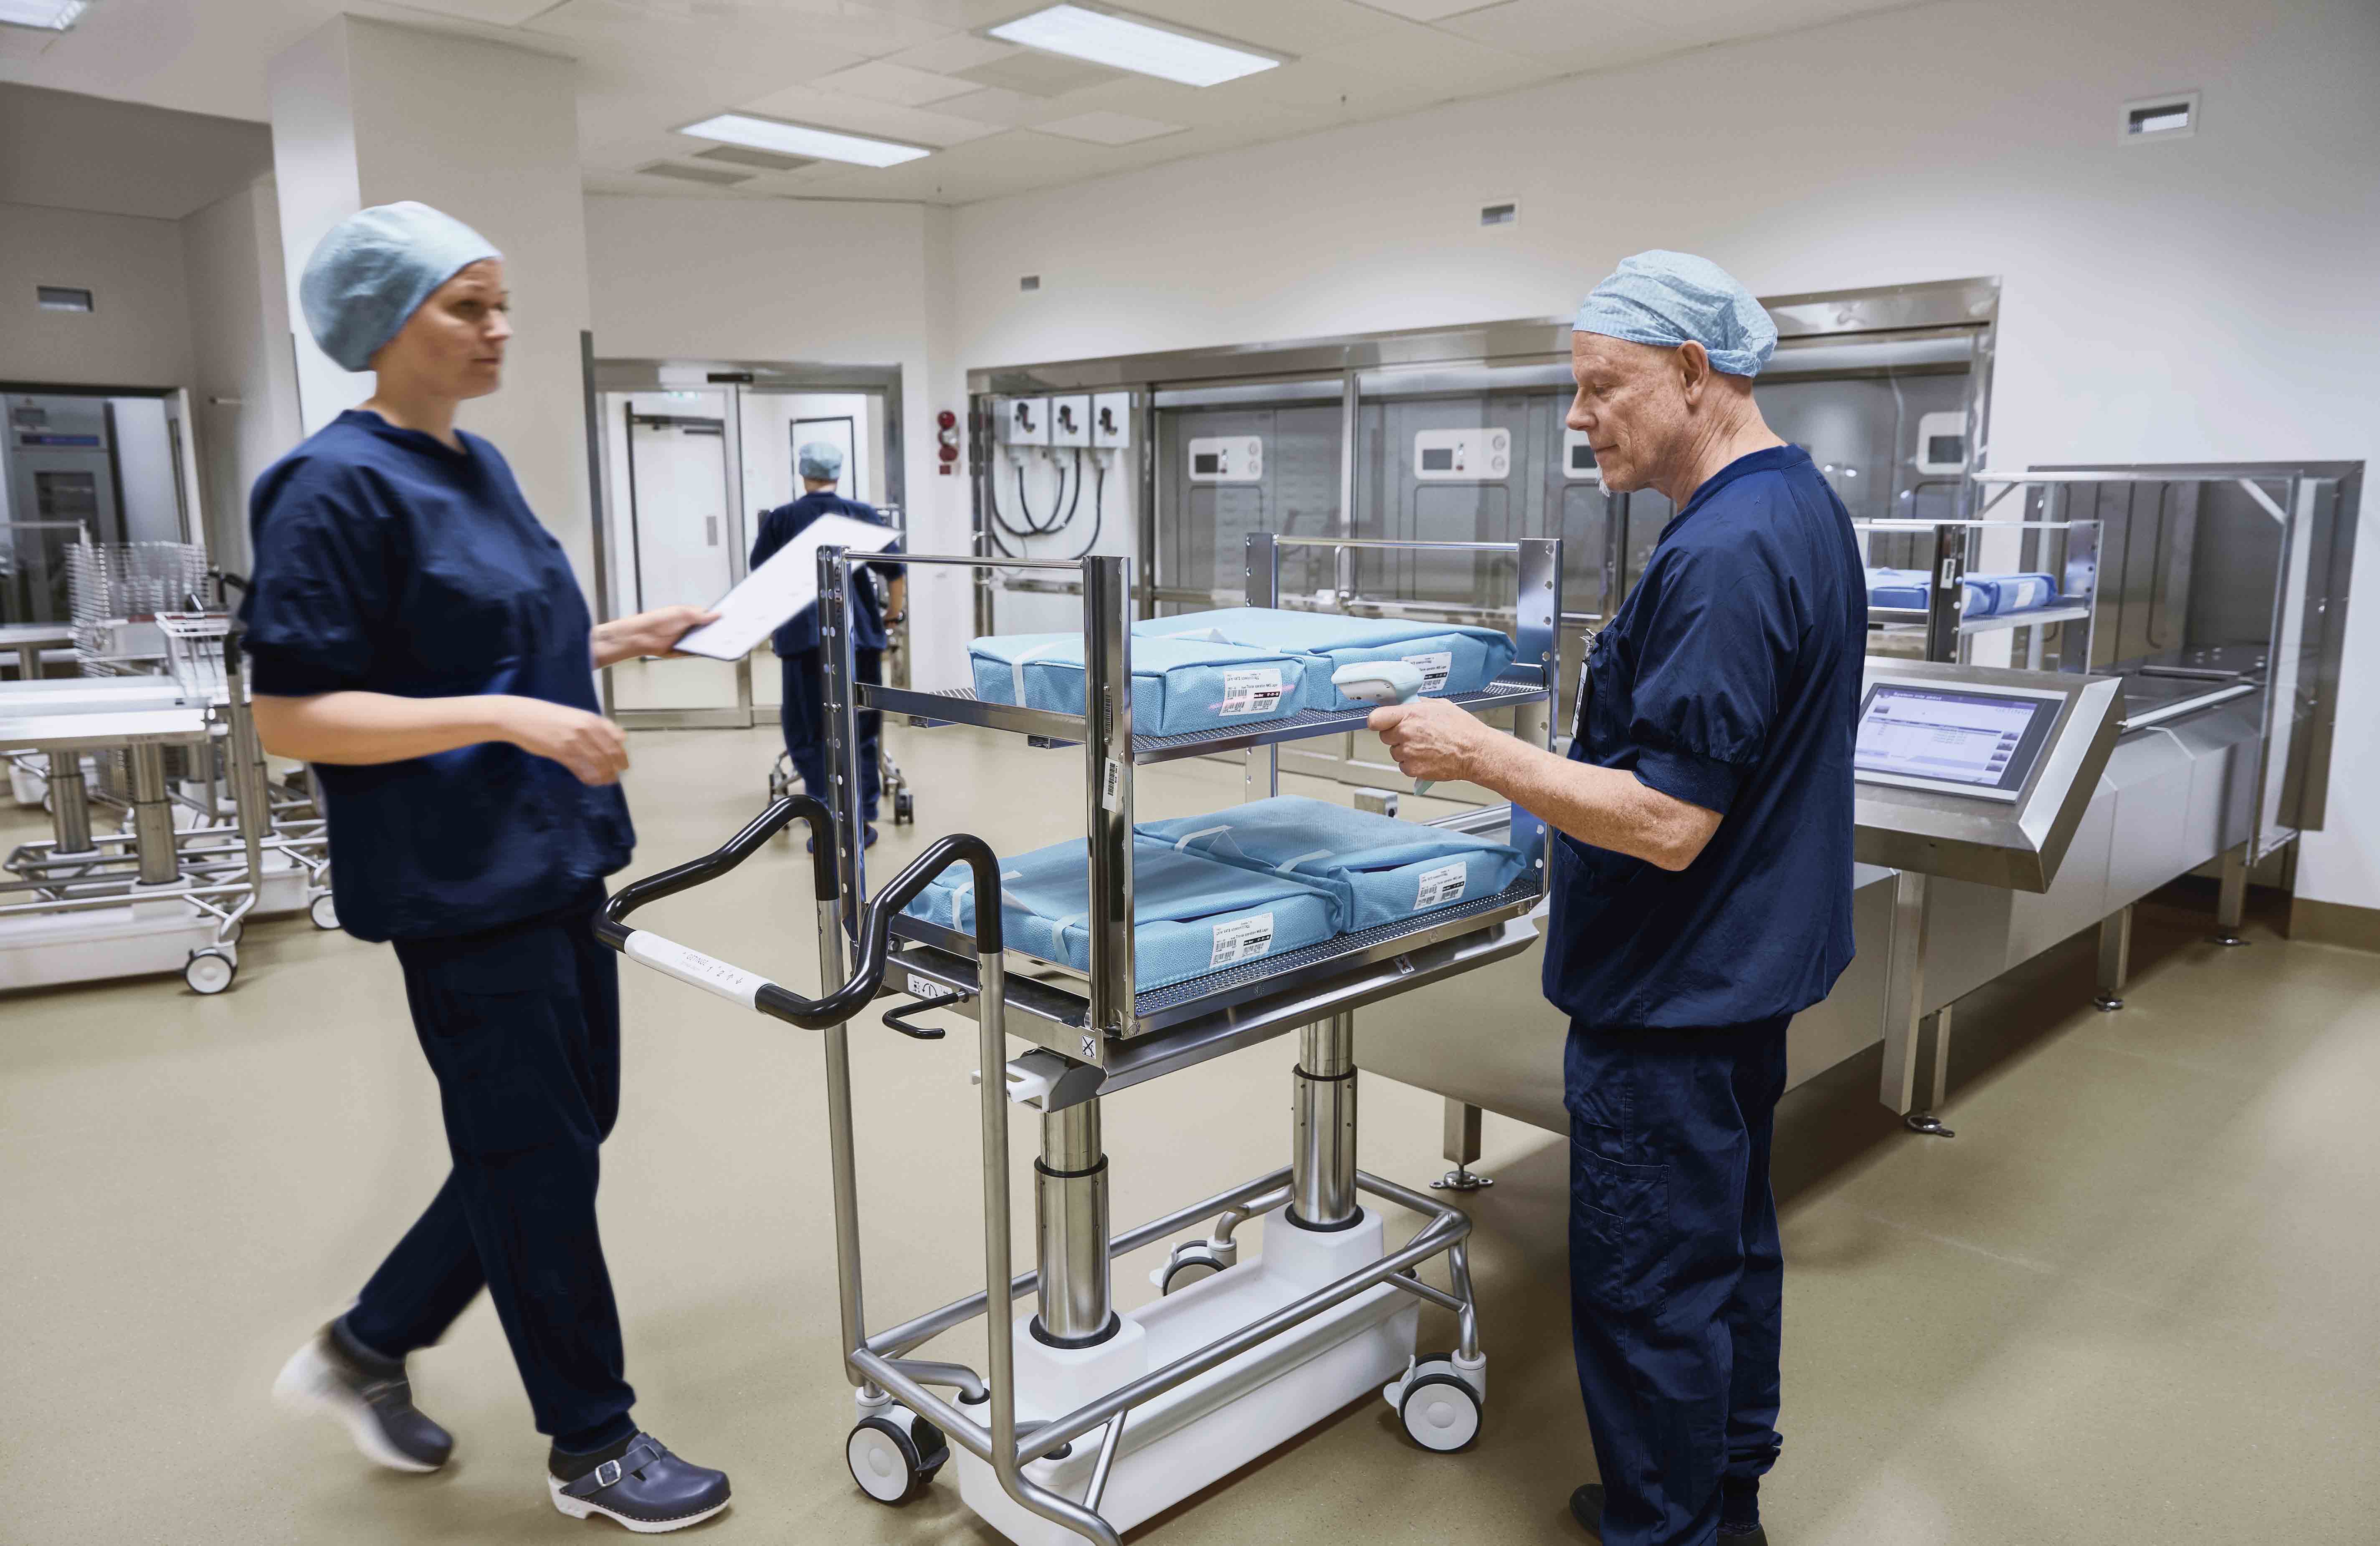 CSSDs technicians fast-tracking trays and instruments to ensure on-time delivery for surgeries